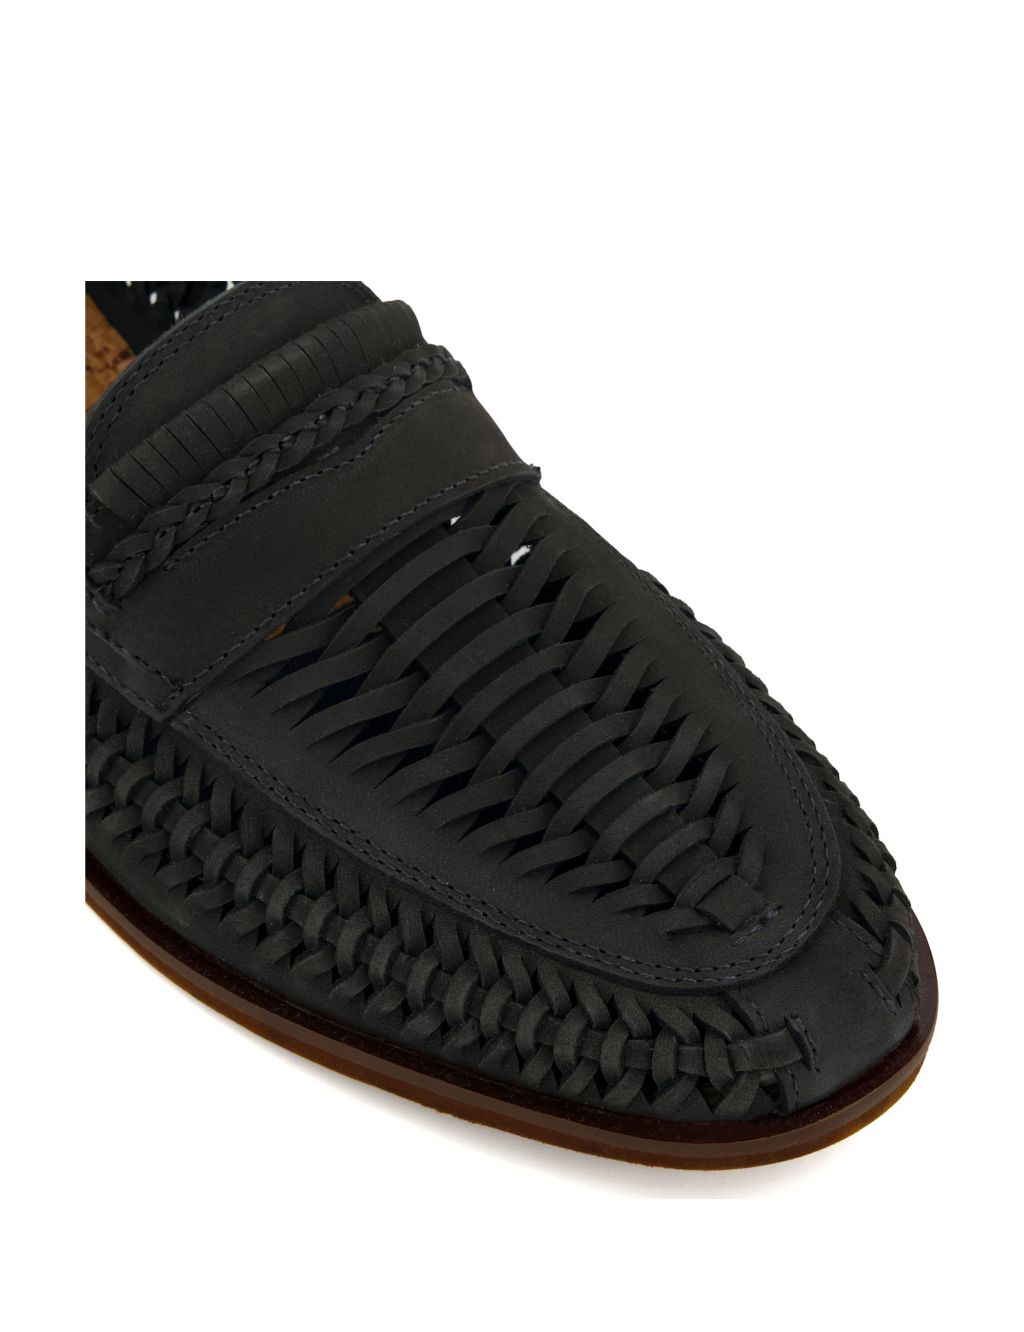 Leather Woven Flat Loafers image 3